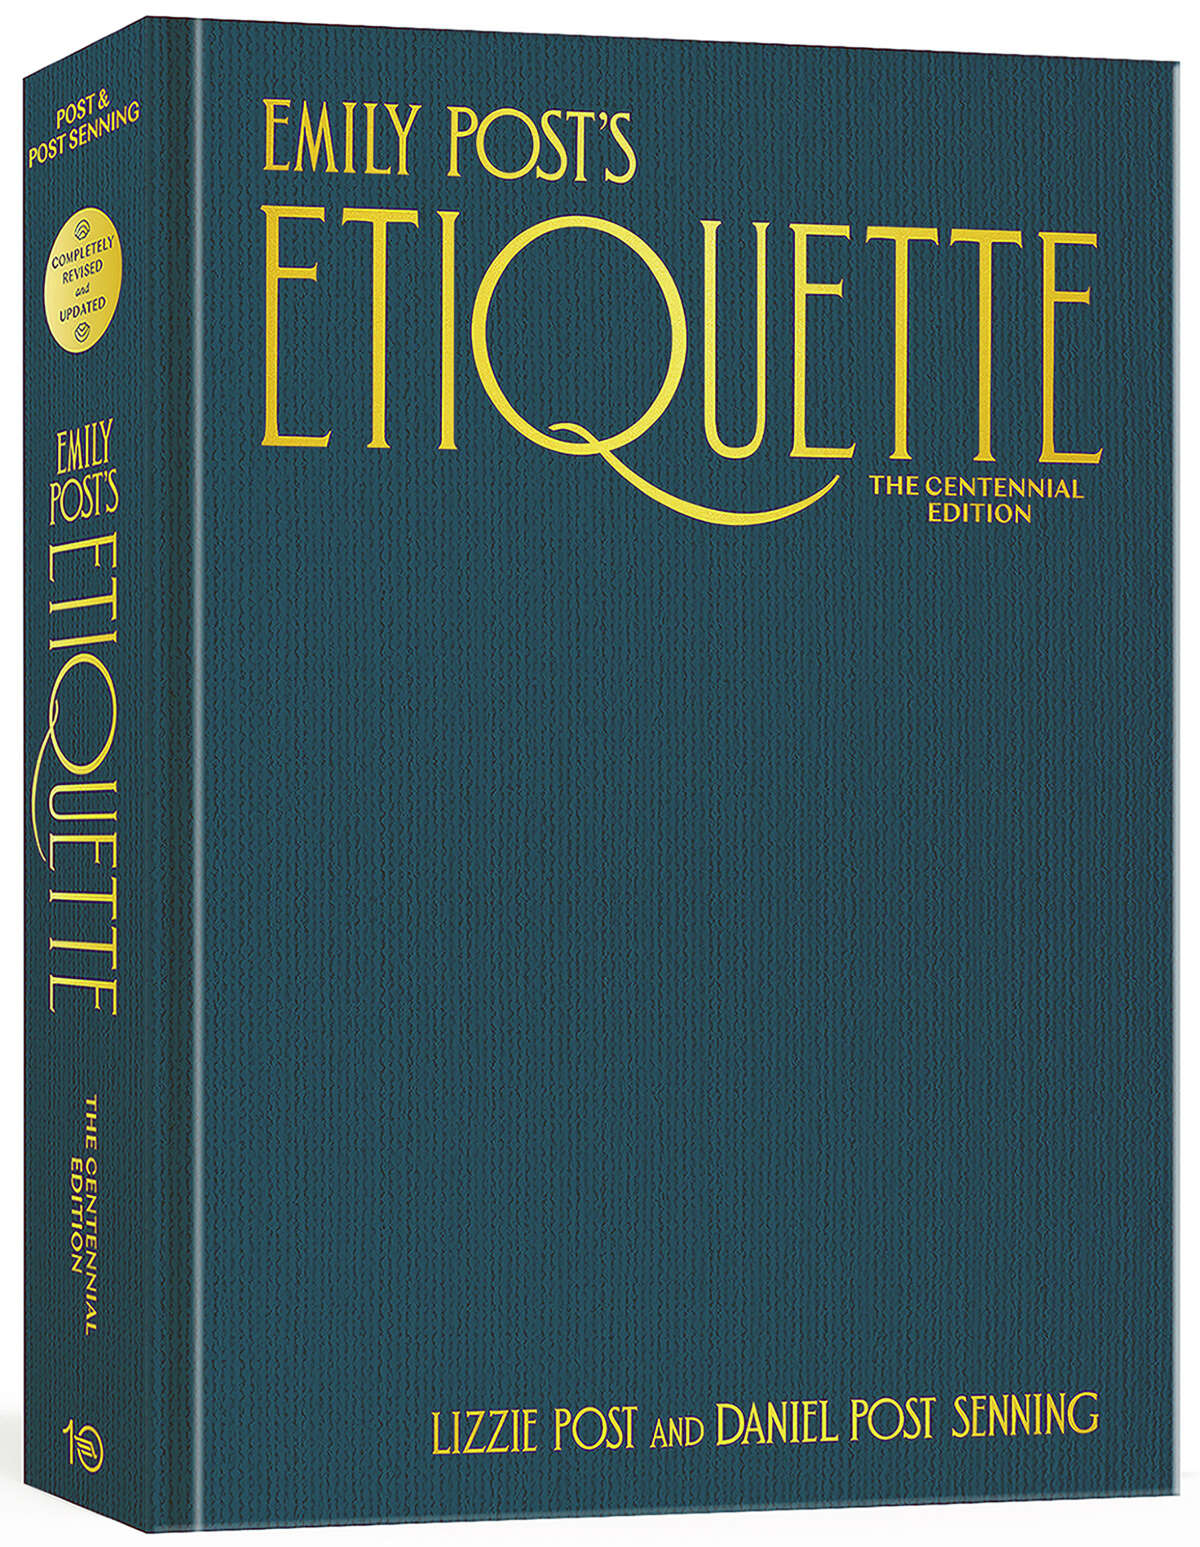 "Emily Post's Etiquette, The Centennial Edition" is by Post descendants Lizzie Post and Daniel Post Senning. The grande dame of all things manners died in 1960 but her two descendants have overhauled her lasting book of tips for the 21st century. (The Emily Post Institute/Ten Speed Press via AP)